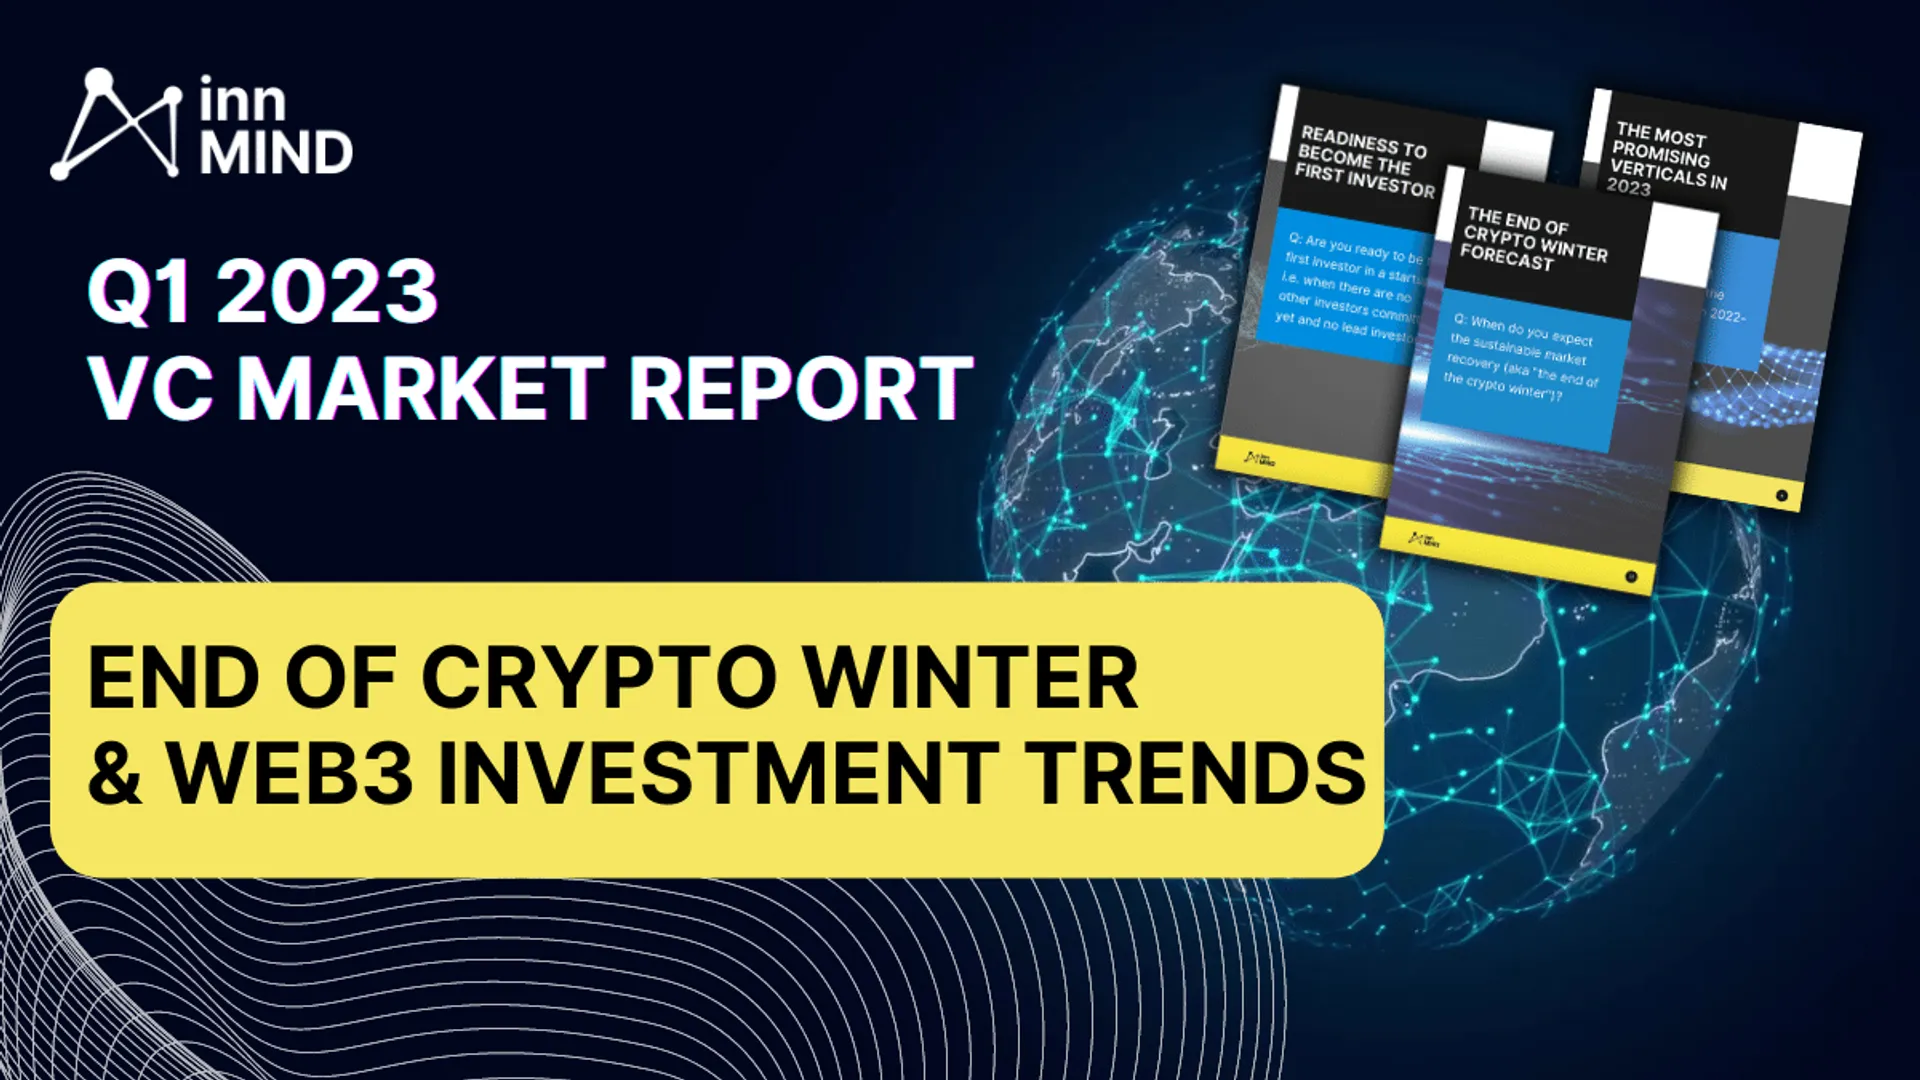 🌐 Good news, guys! Crypto Winter will end this year and there is a rise of the Next Bull Market in 2024 🆒 😃

We got it from InnMind VC report. There are some other highlights:

 👉 The majority of VCs plan to either invest in more startups this year (📈42.9%) or maintain their current investment pace (35.7%).

👉 Hybrid investments (equity + tokens) are the preferred investment type for 53.6% of VCs, while 39.3% opt for pure token investments.

👉 Over half of the surveyed VCs (53.6%) are open to being the first investor on a startup's cap table.

 ➡️ Report overview:  ➡️ https://blog.innmind.com/vcs-predict-the-end-of-crypto-winter-and-the-rise-of-the-next-bull-market-in-2024/